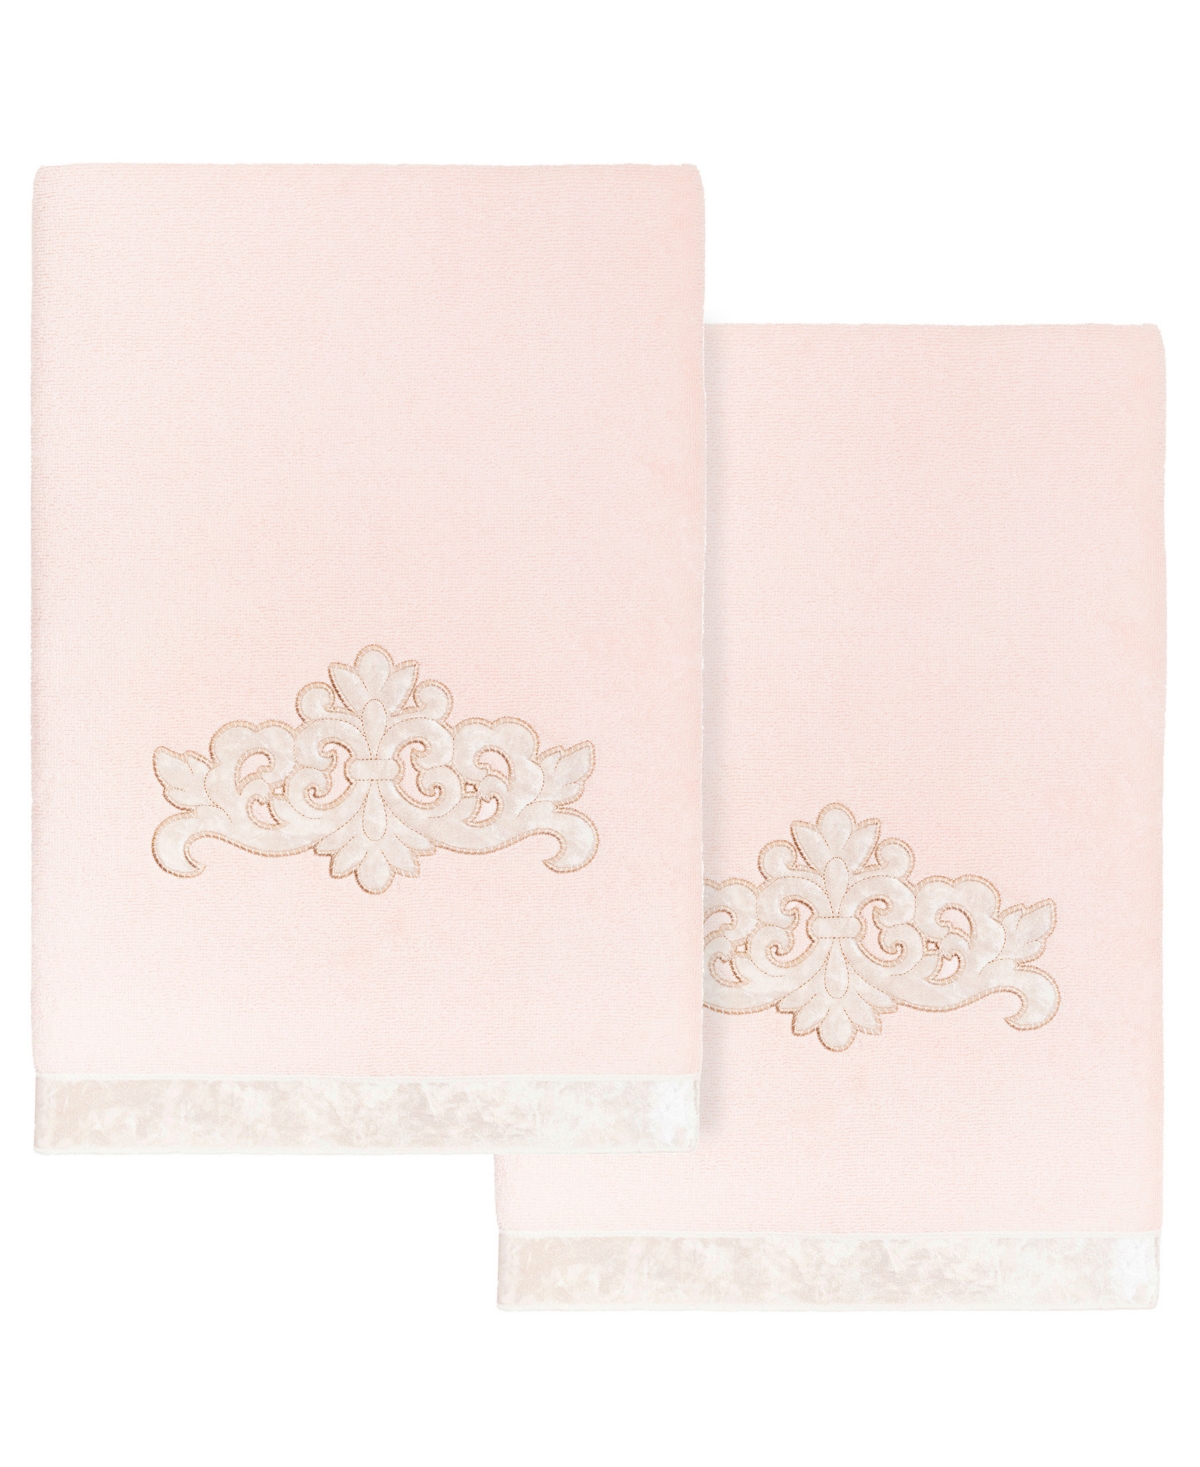 Linum Home Textiles Turkish Cotton May Embellished Bath Towel Set, 2 Piece Bedding In Blush